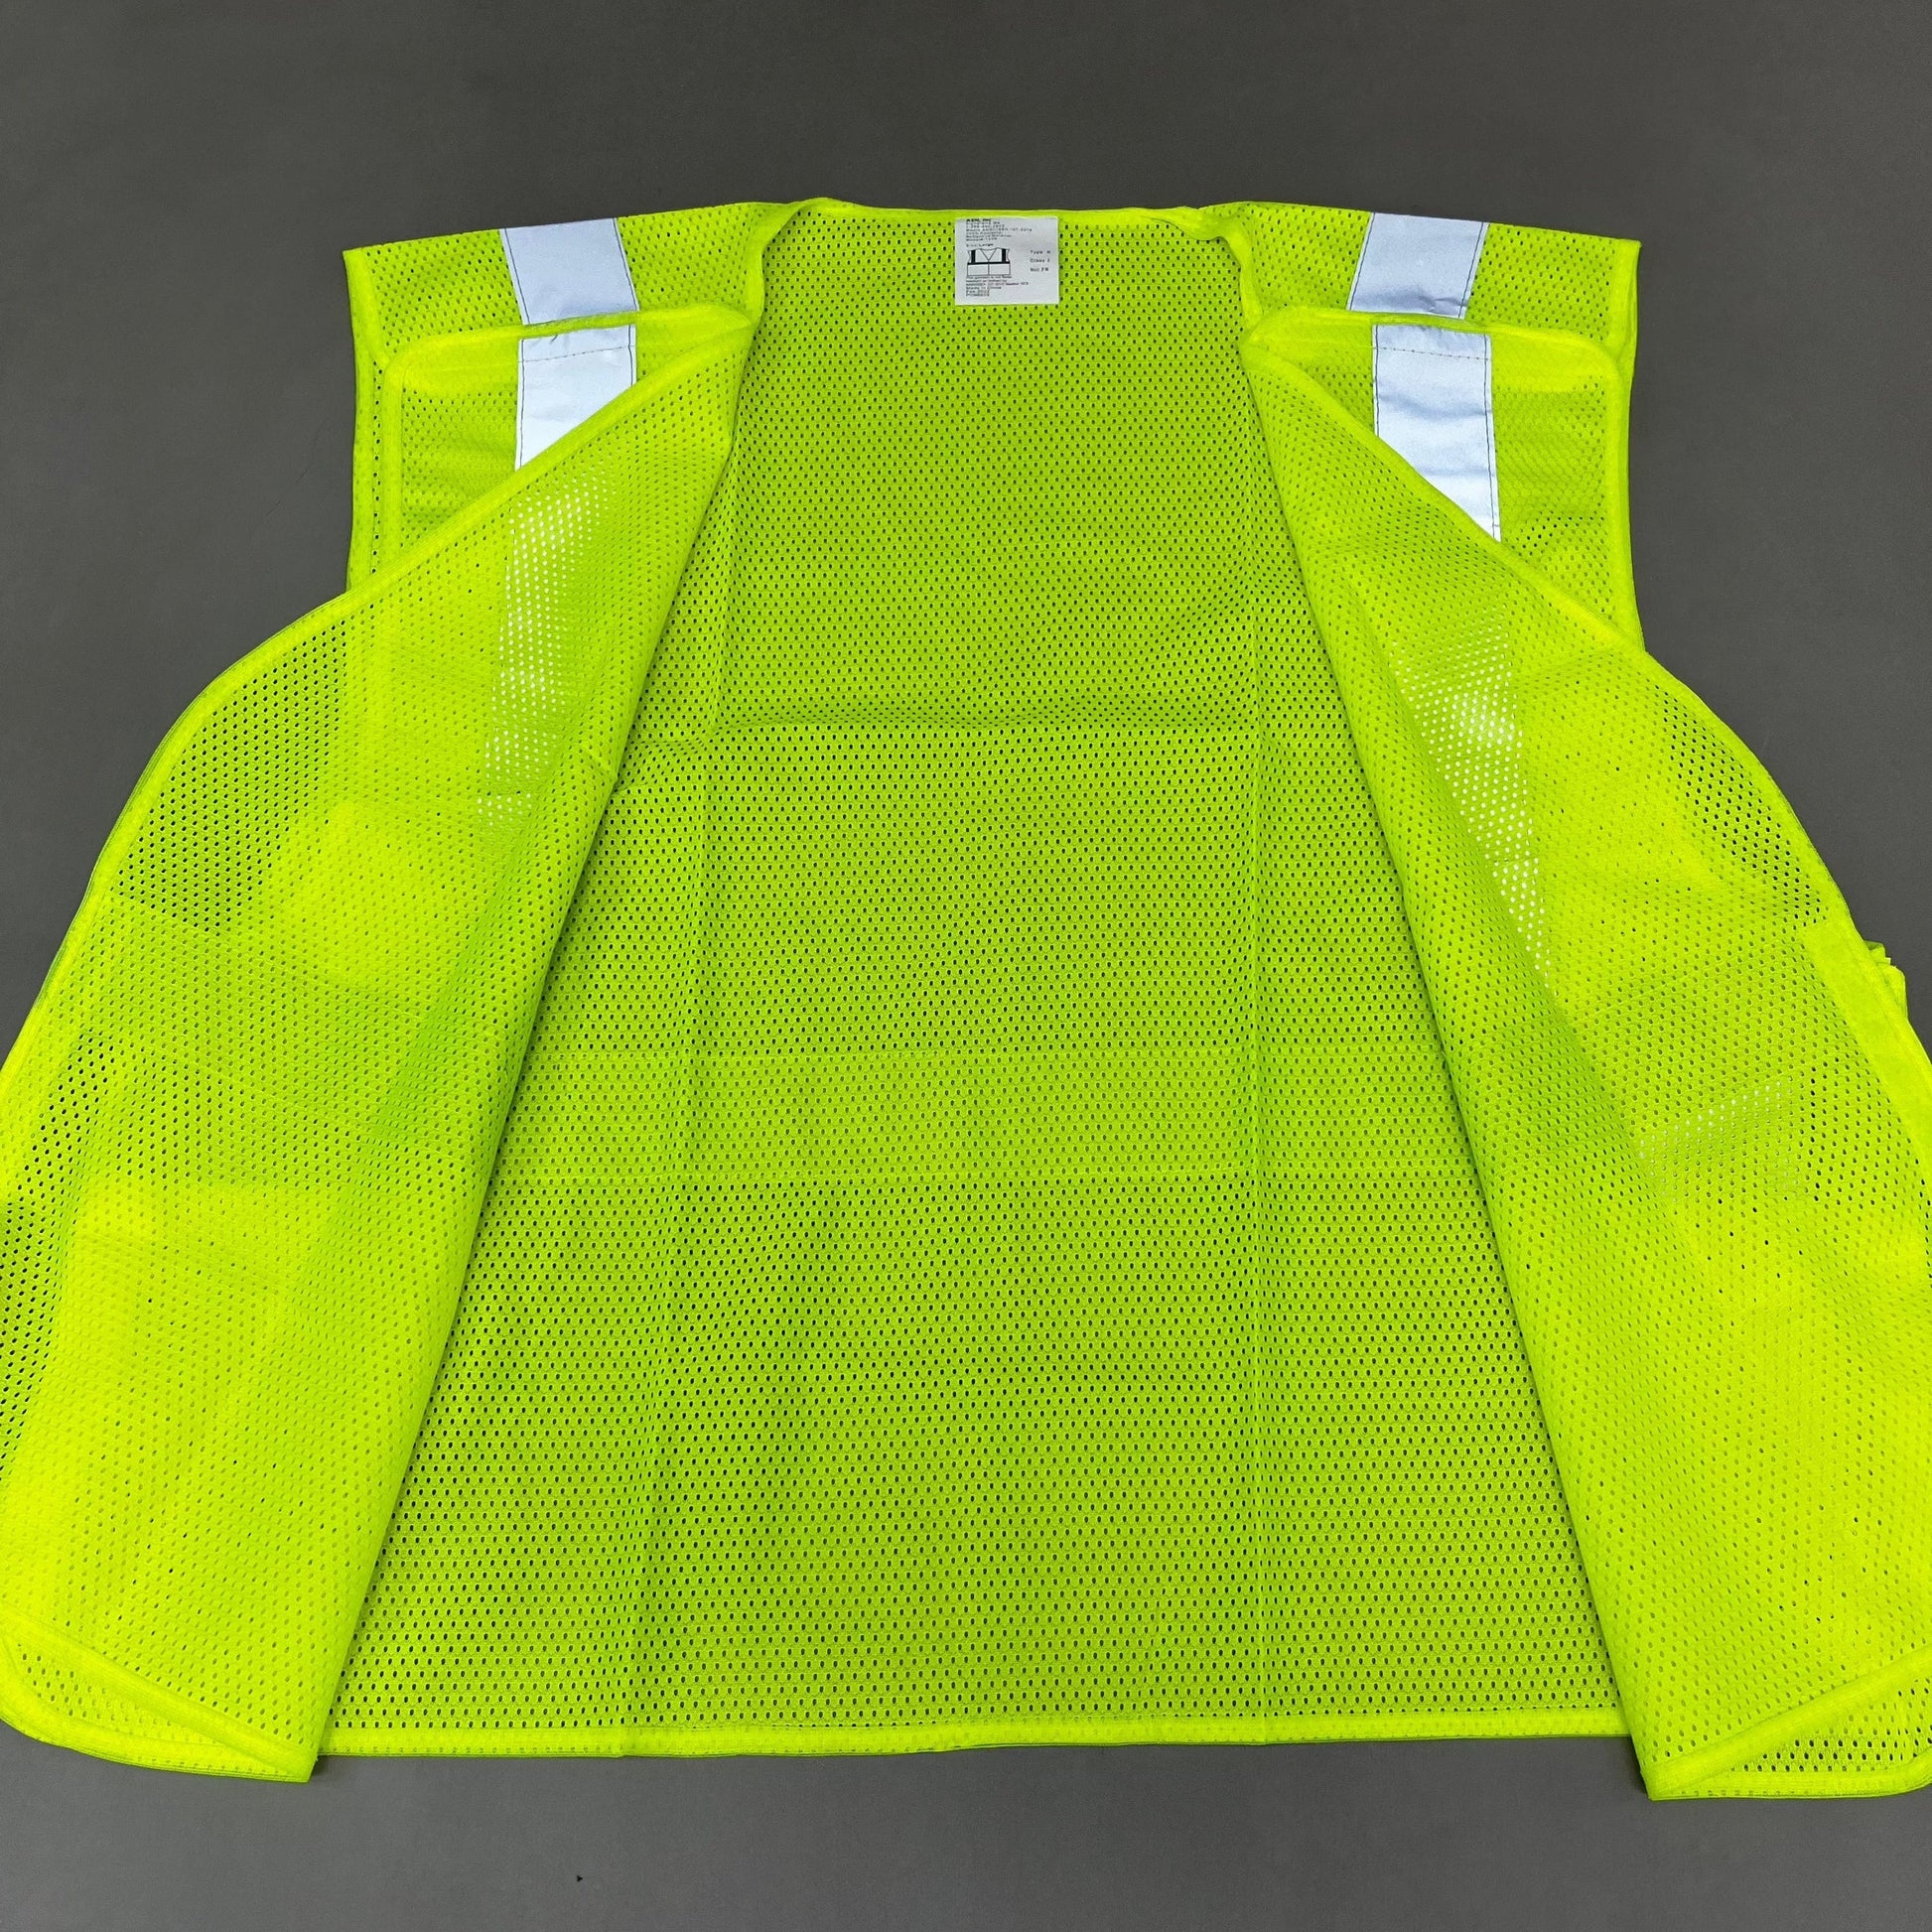 Chief Miller Employee Apparel ASN INC Yellow Reflective Safety Vest Unisex Sz-Large Neon Yellow 1409224 (New) Apparel